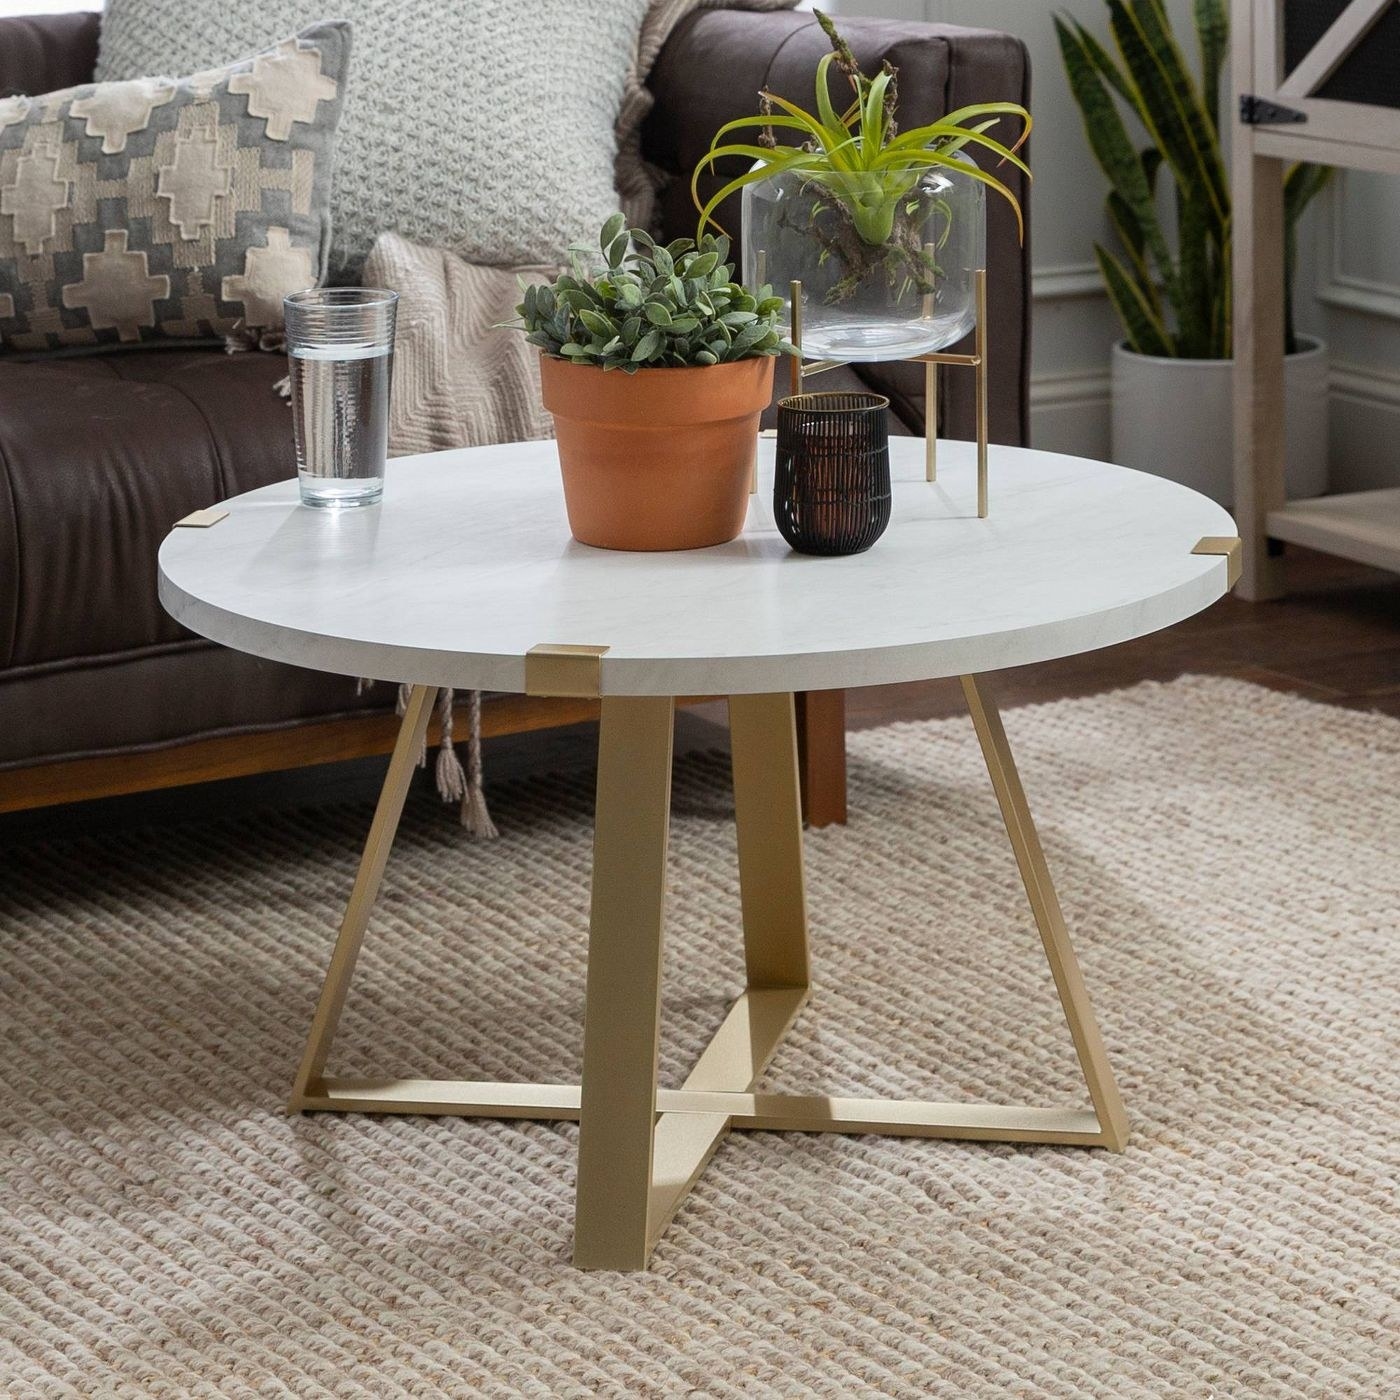 The table pictured in the faux white marble and gold finish